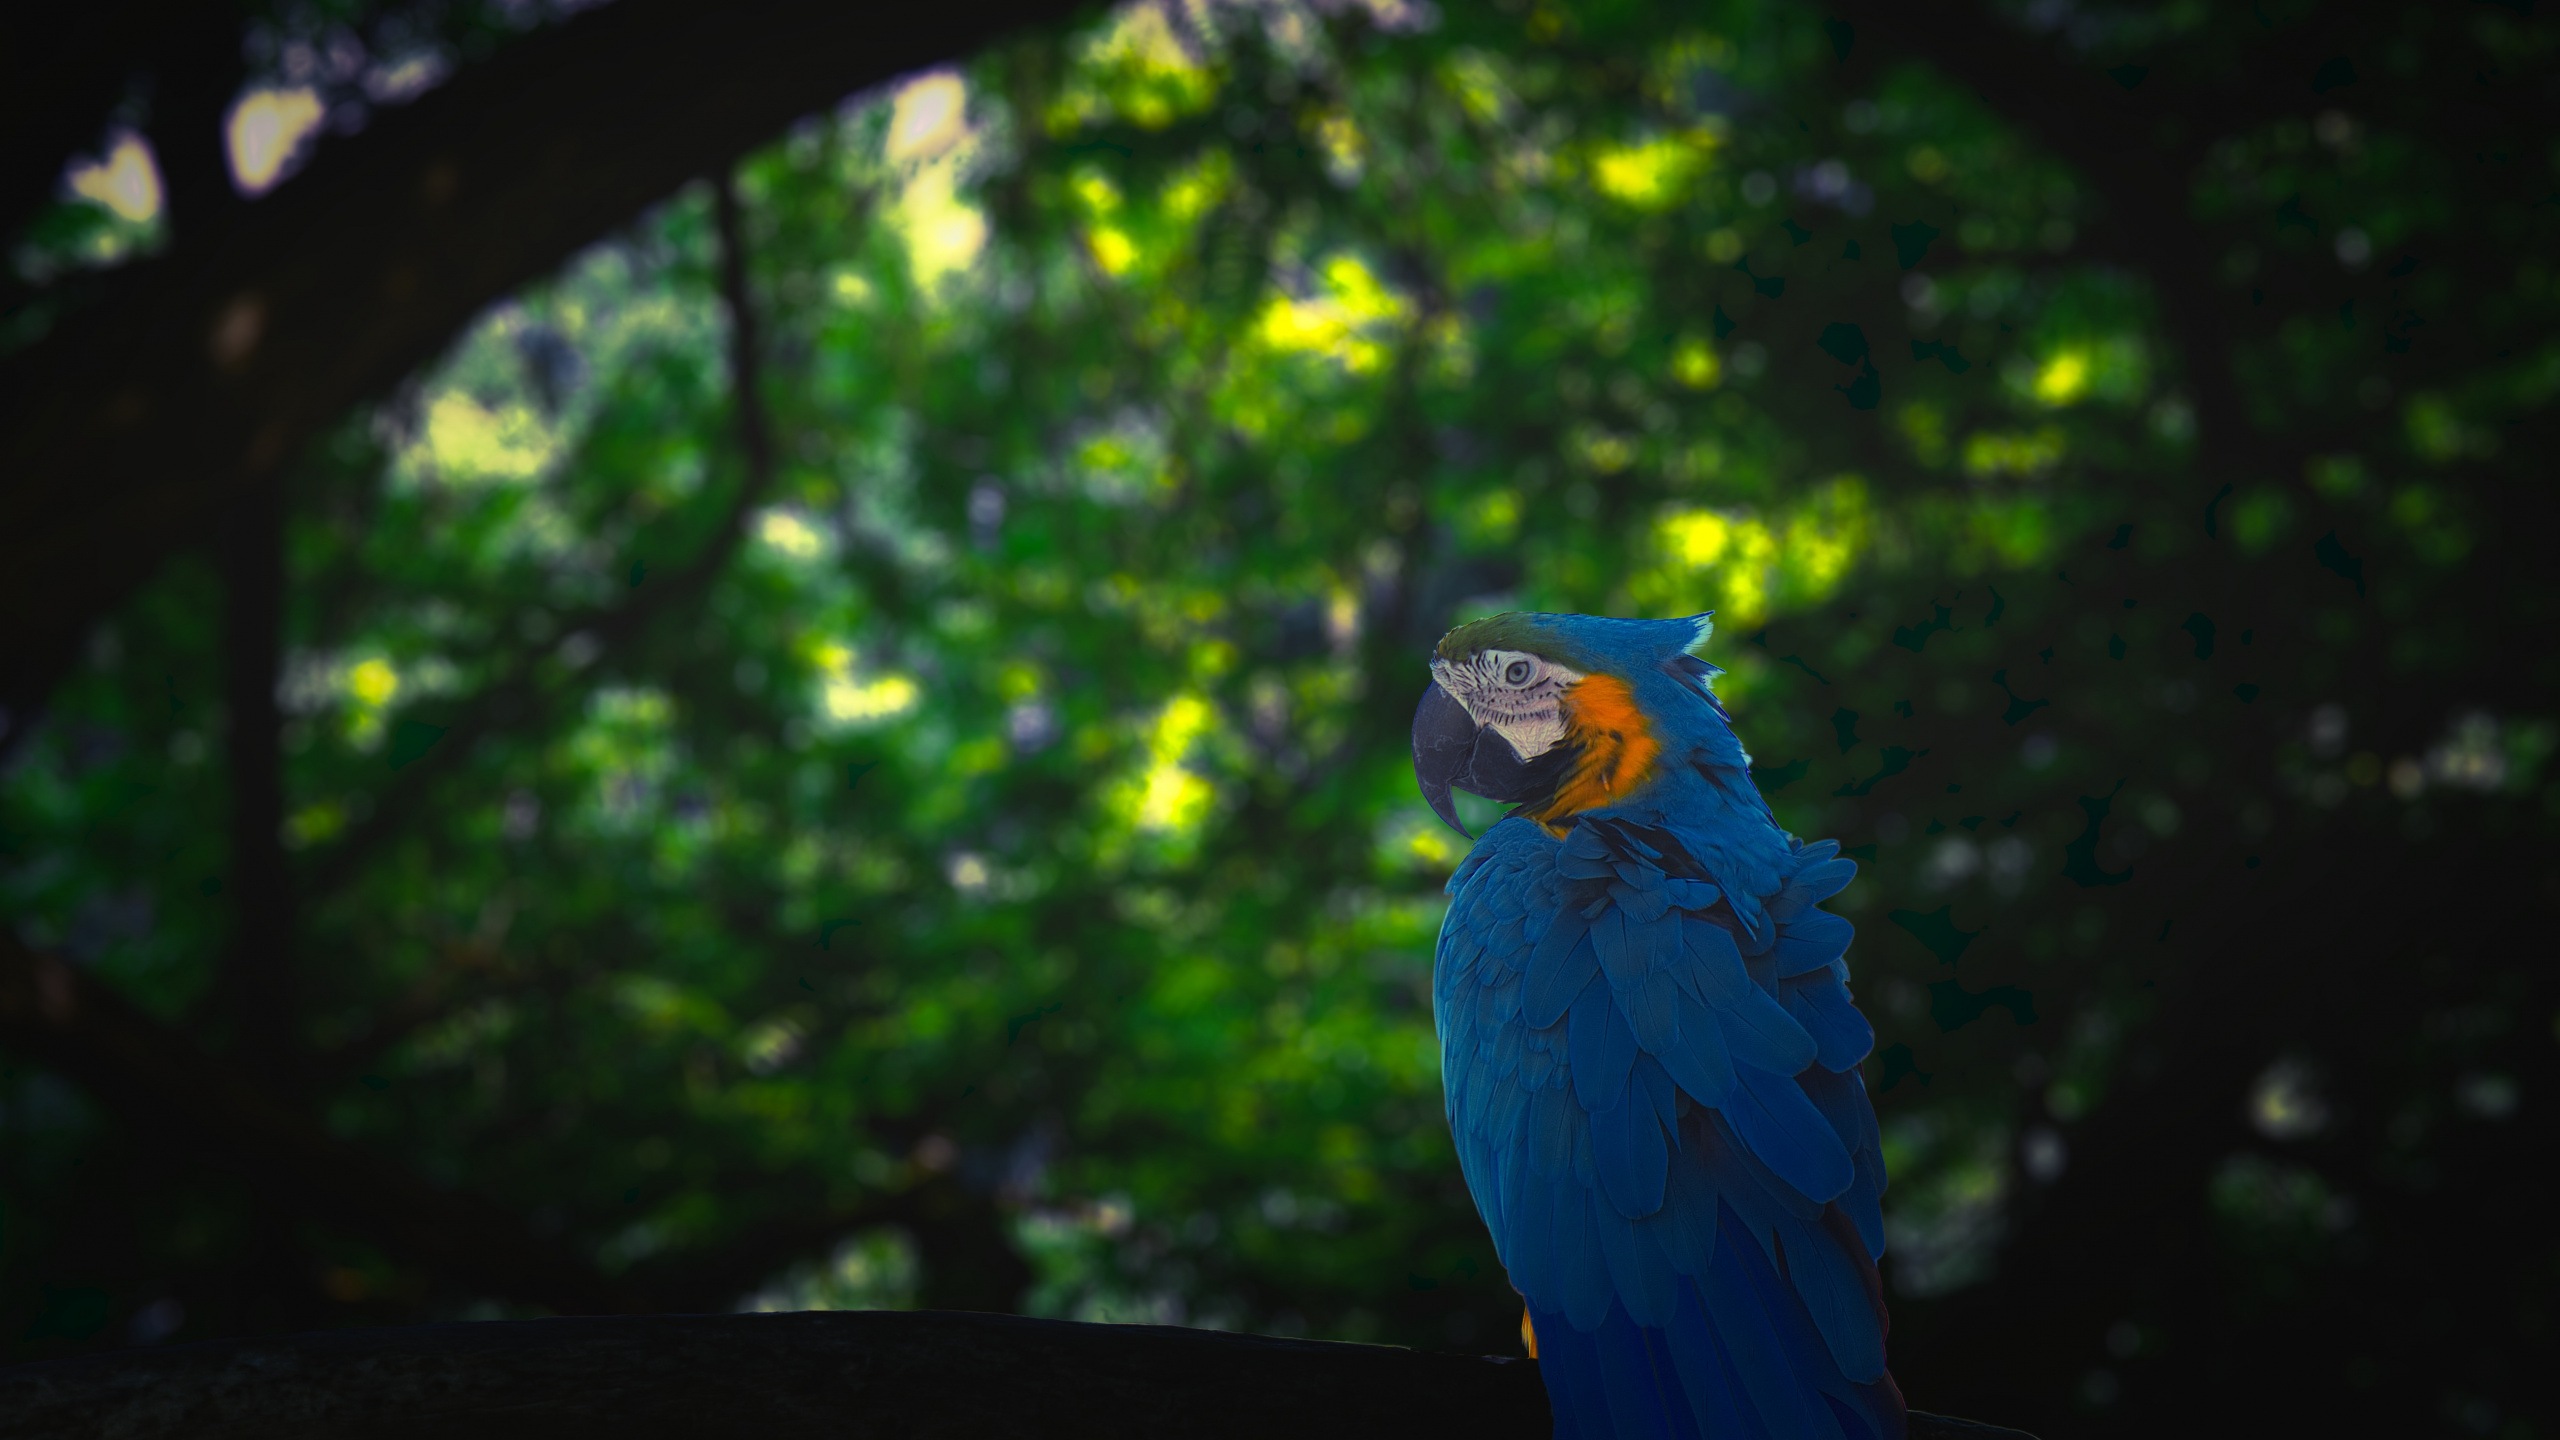 Blue and Yellow Macaw on Black Wooden Fence During Daytime. Wallpaper in 2560x1440 Resolution